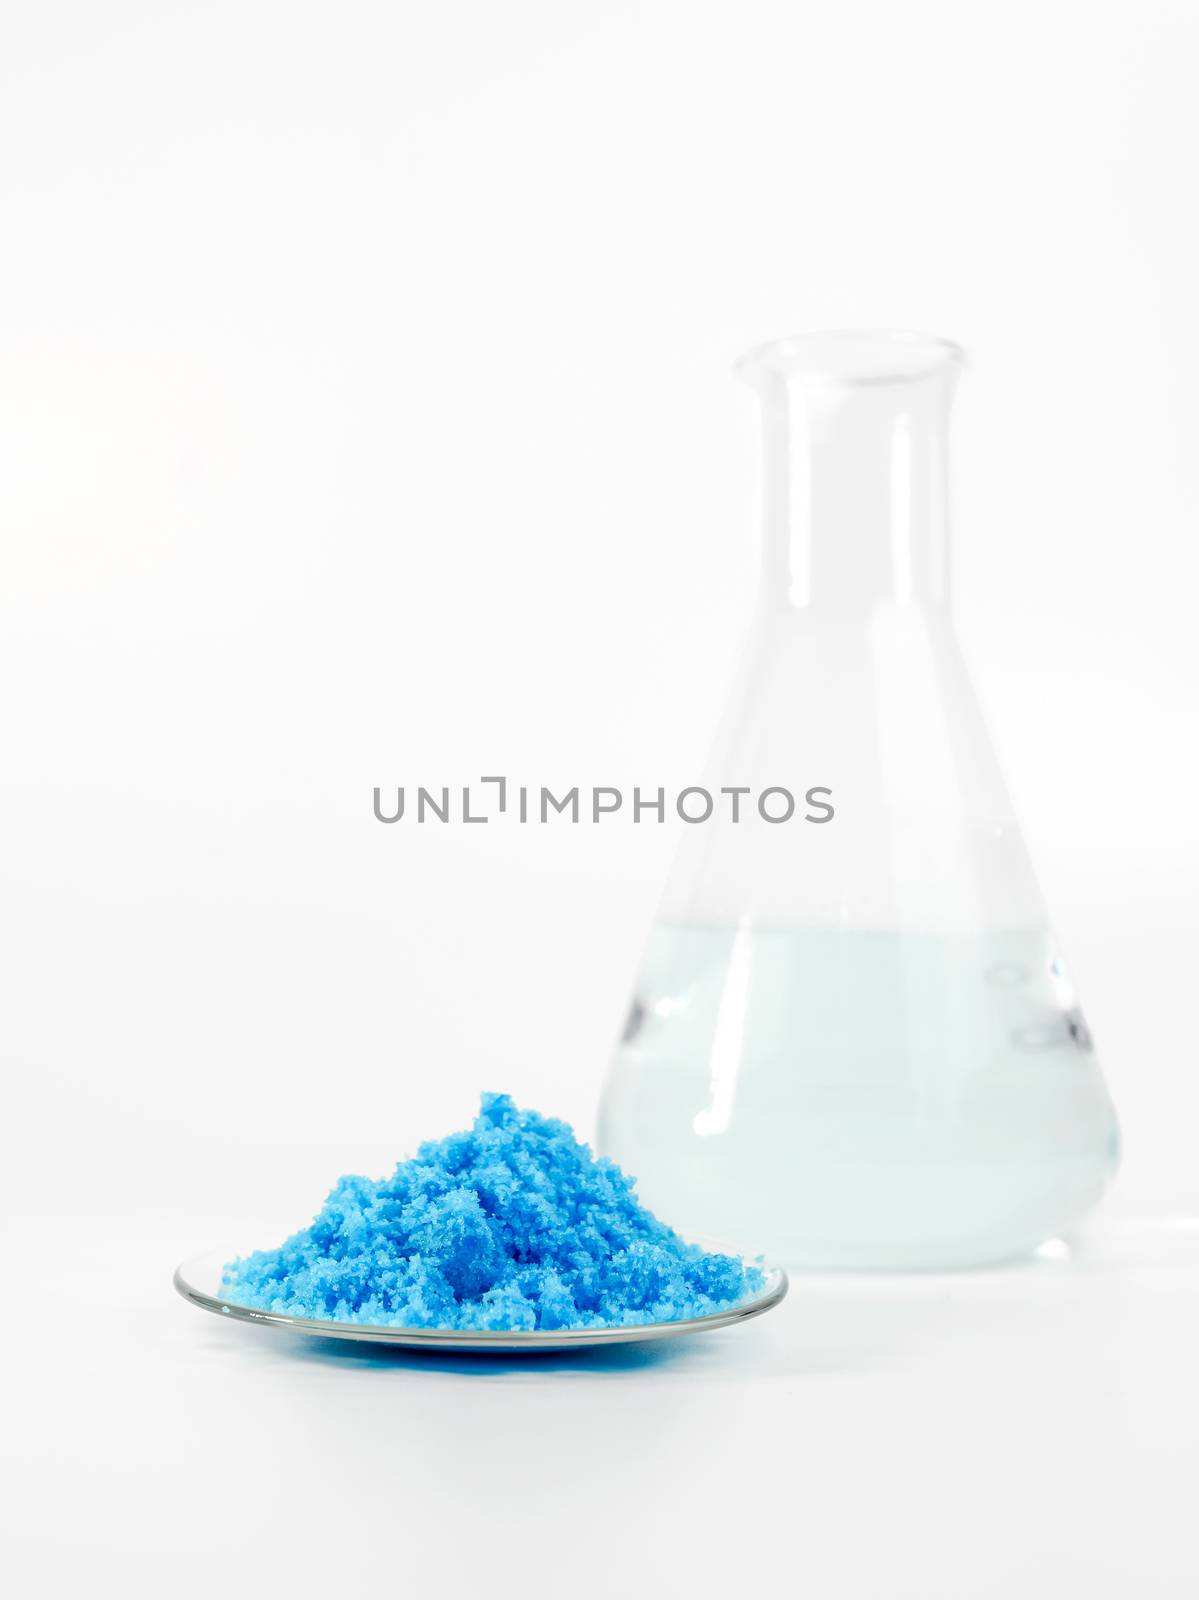 Close up inorganic chemical on white laboratory table. by chadchai_k